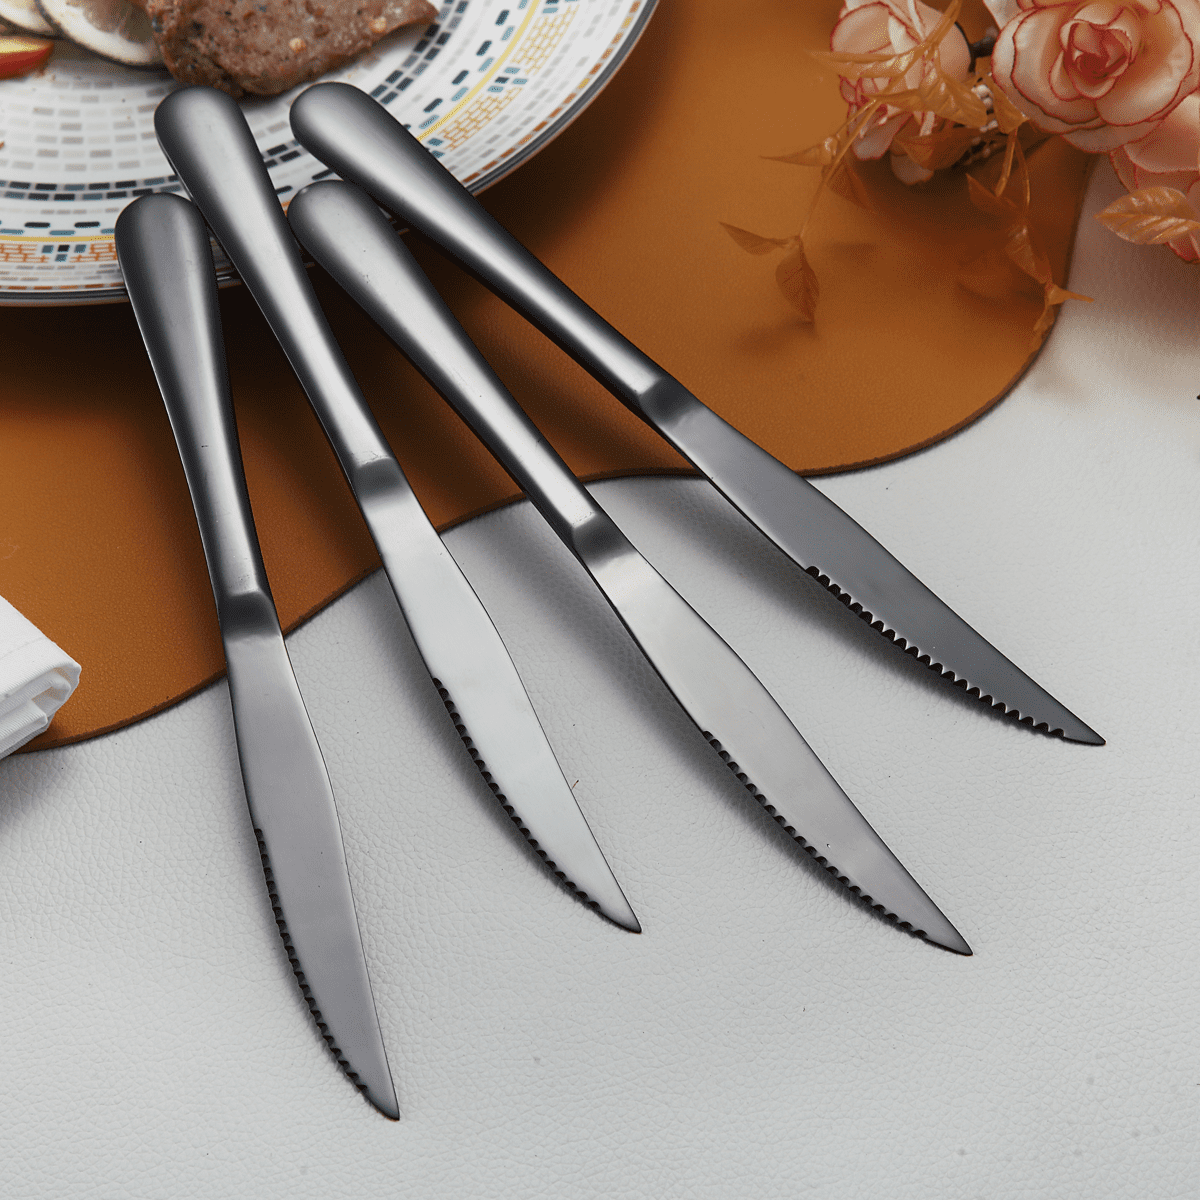 Stainless Steel Serrated Steak Knife Set of 6, BuyGo Gold Color Heavy Duty Dinner Table Knives for Cutting Meat, Beef, 8.6 inch, Dishwasher Safe